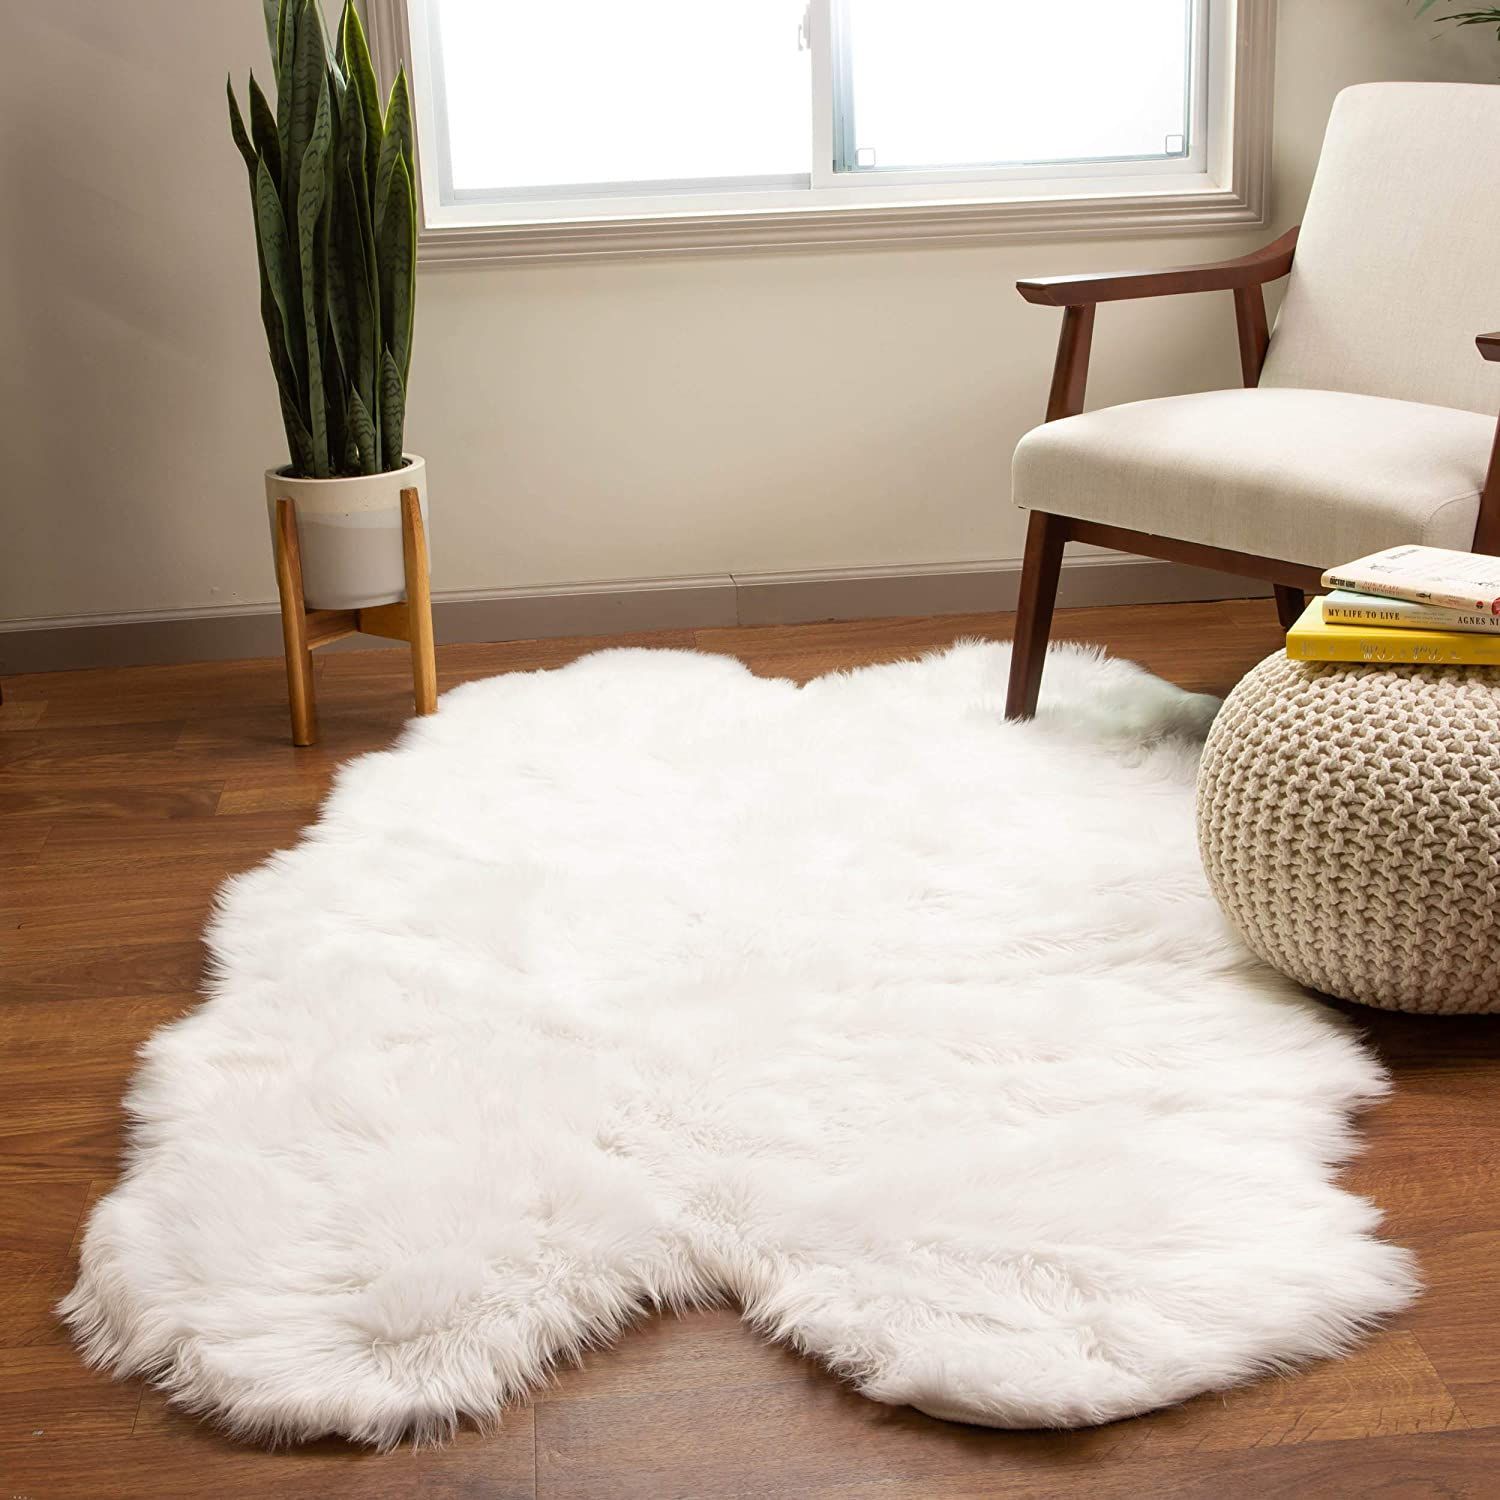 Soft Area Rugs To Make Your Home Cozy, Fur Area Rug